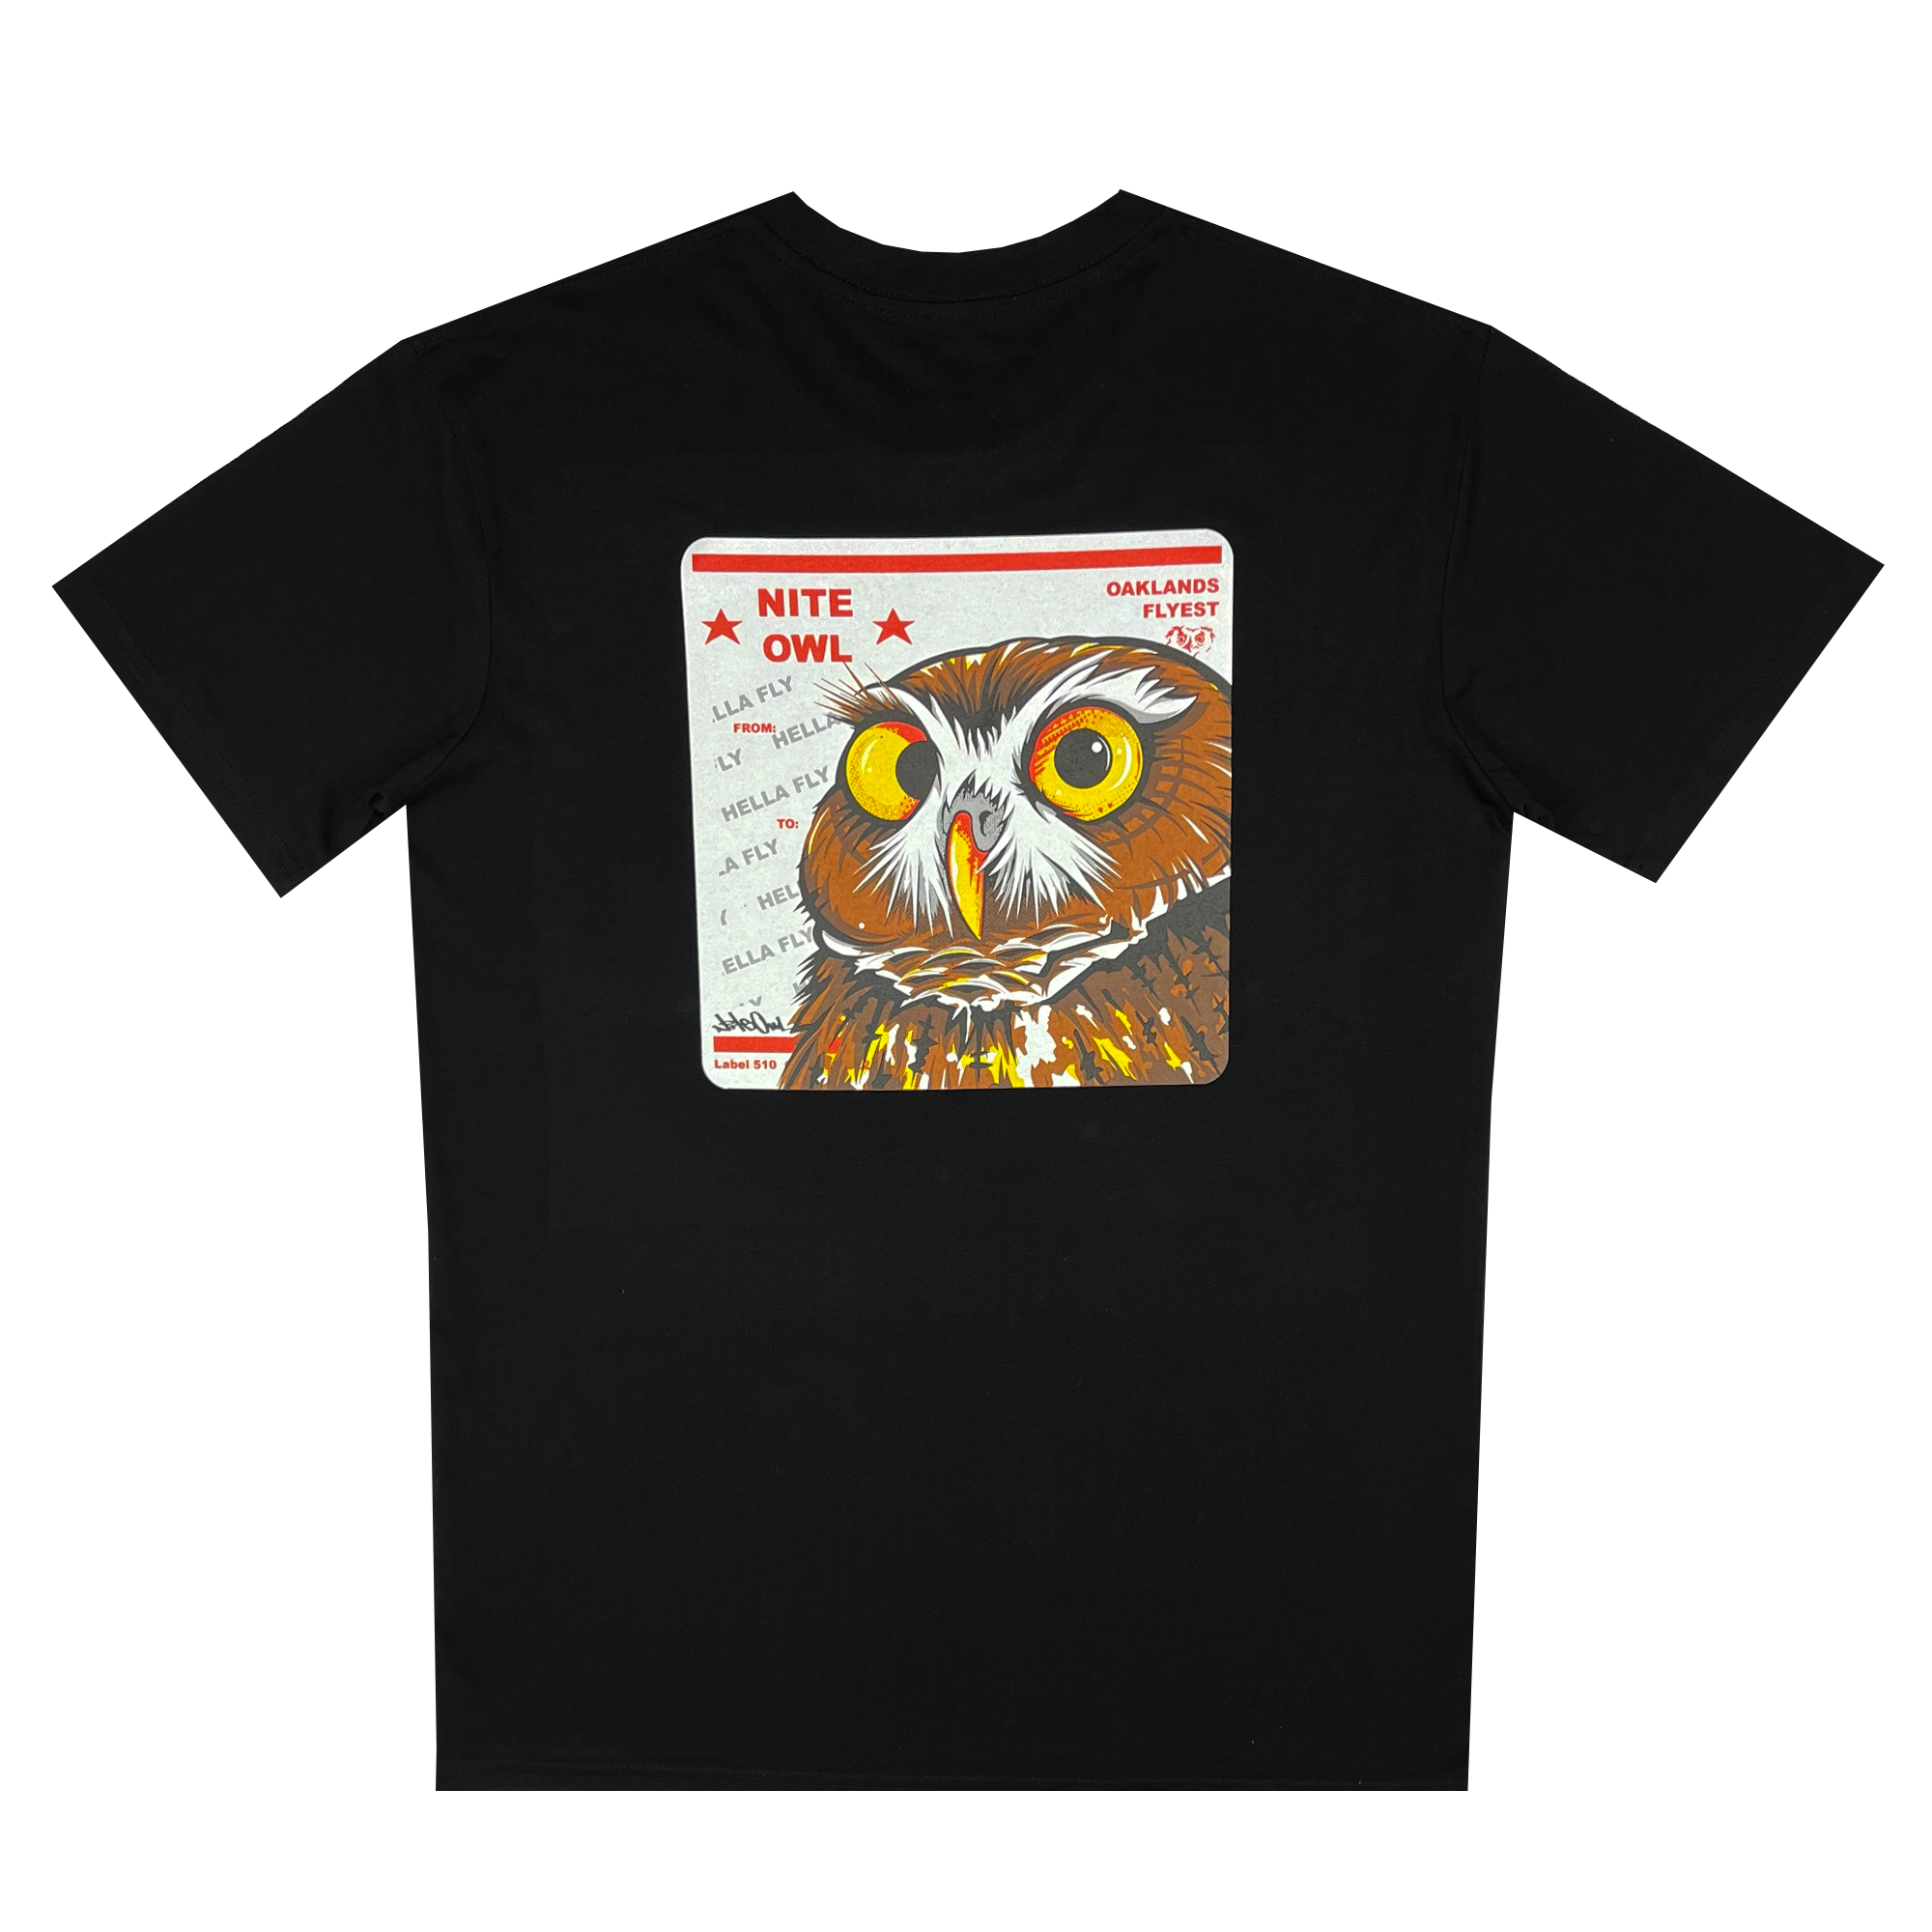 Backside view of a black t-shirt featuring a graphic with a Burrowing Owl designed by Oakland Artist Nite Owl on a USPS sticker.